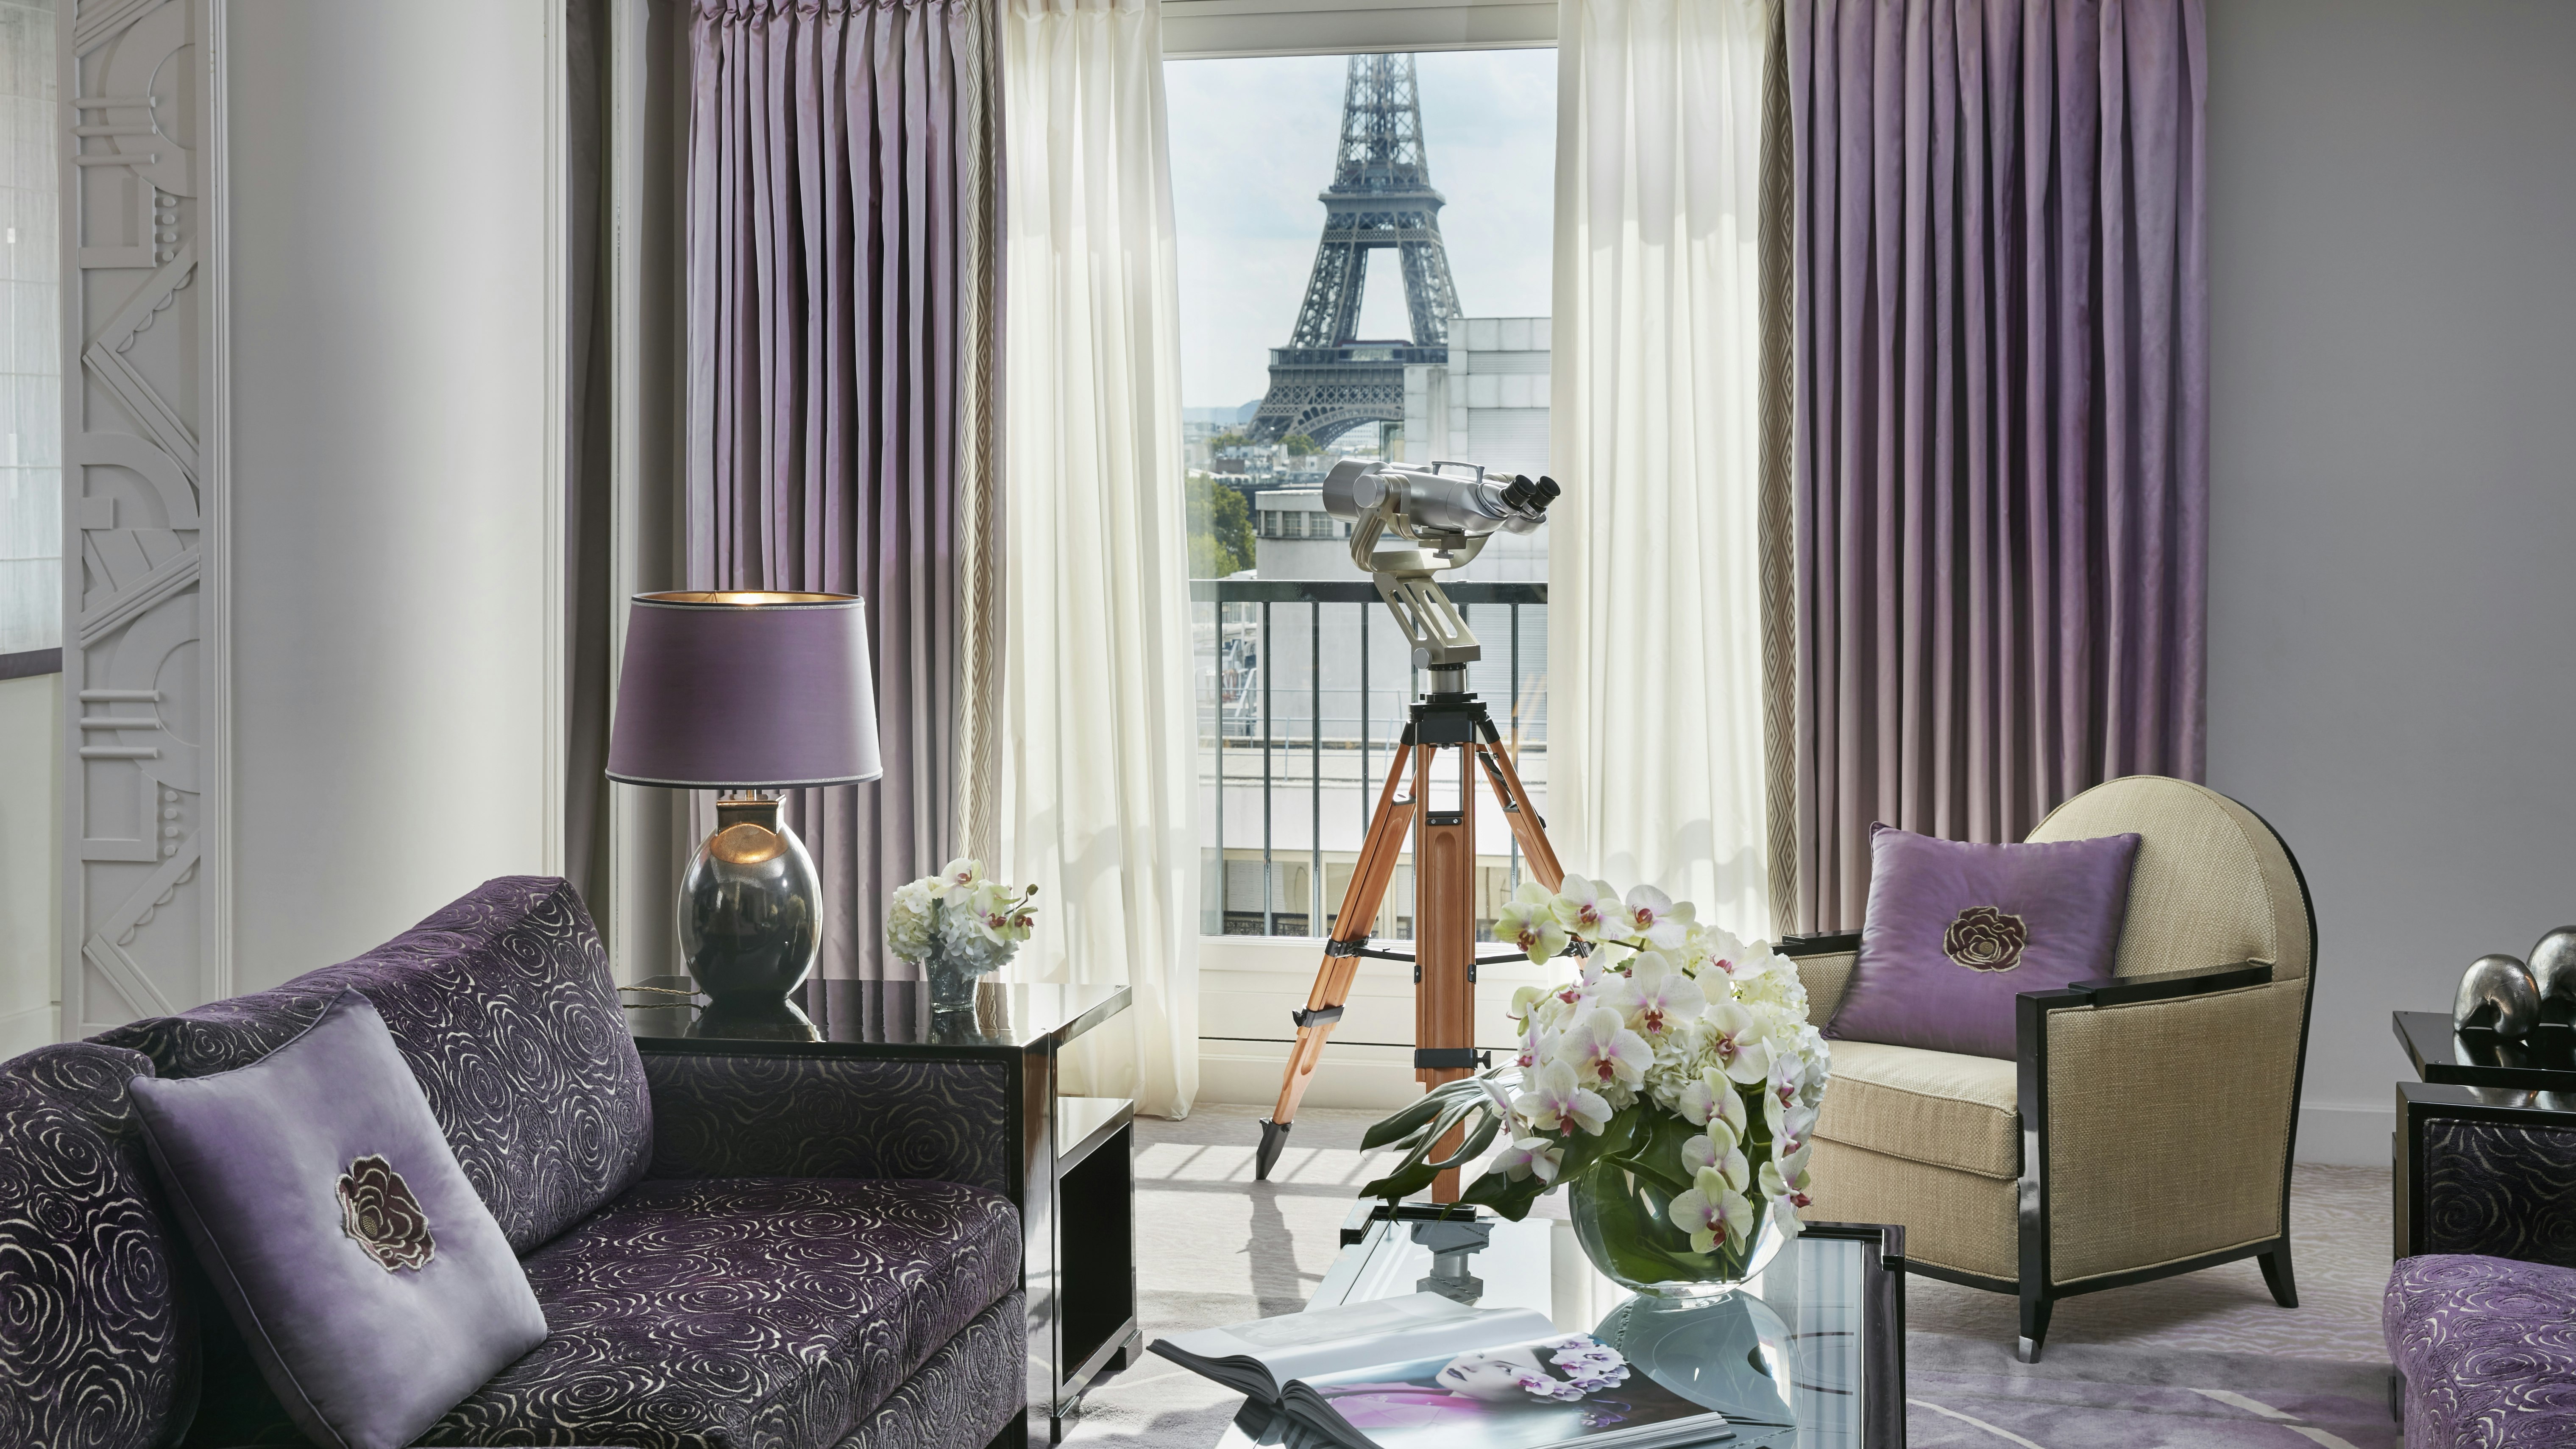 The Eiffel Suite at Hotel Plaza Athenee in Paris is decorated with a luxe purple sofa, lavender curtains, a grey egg-shaped lamp with a lavender shade, a cream chair with lavender throw pillow, and a coffee table with big white blooms in a green vase. Through the window is a view of the bottom portion of the Eiffel tower, with a telescope positioned for easier viewing